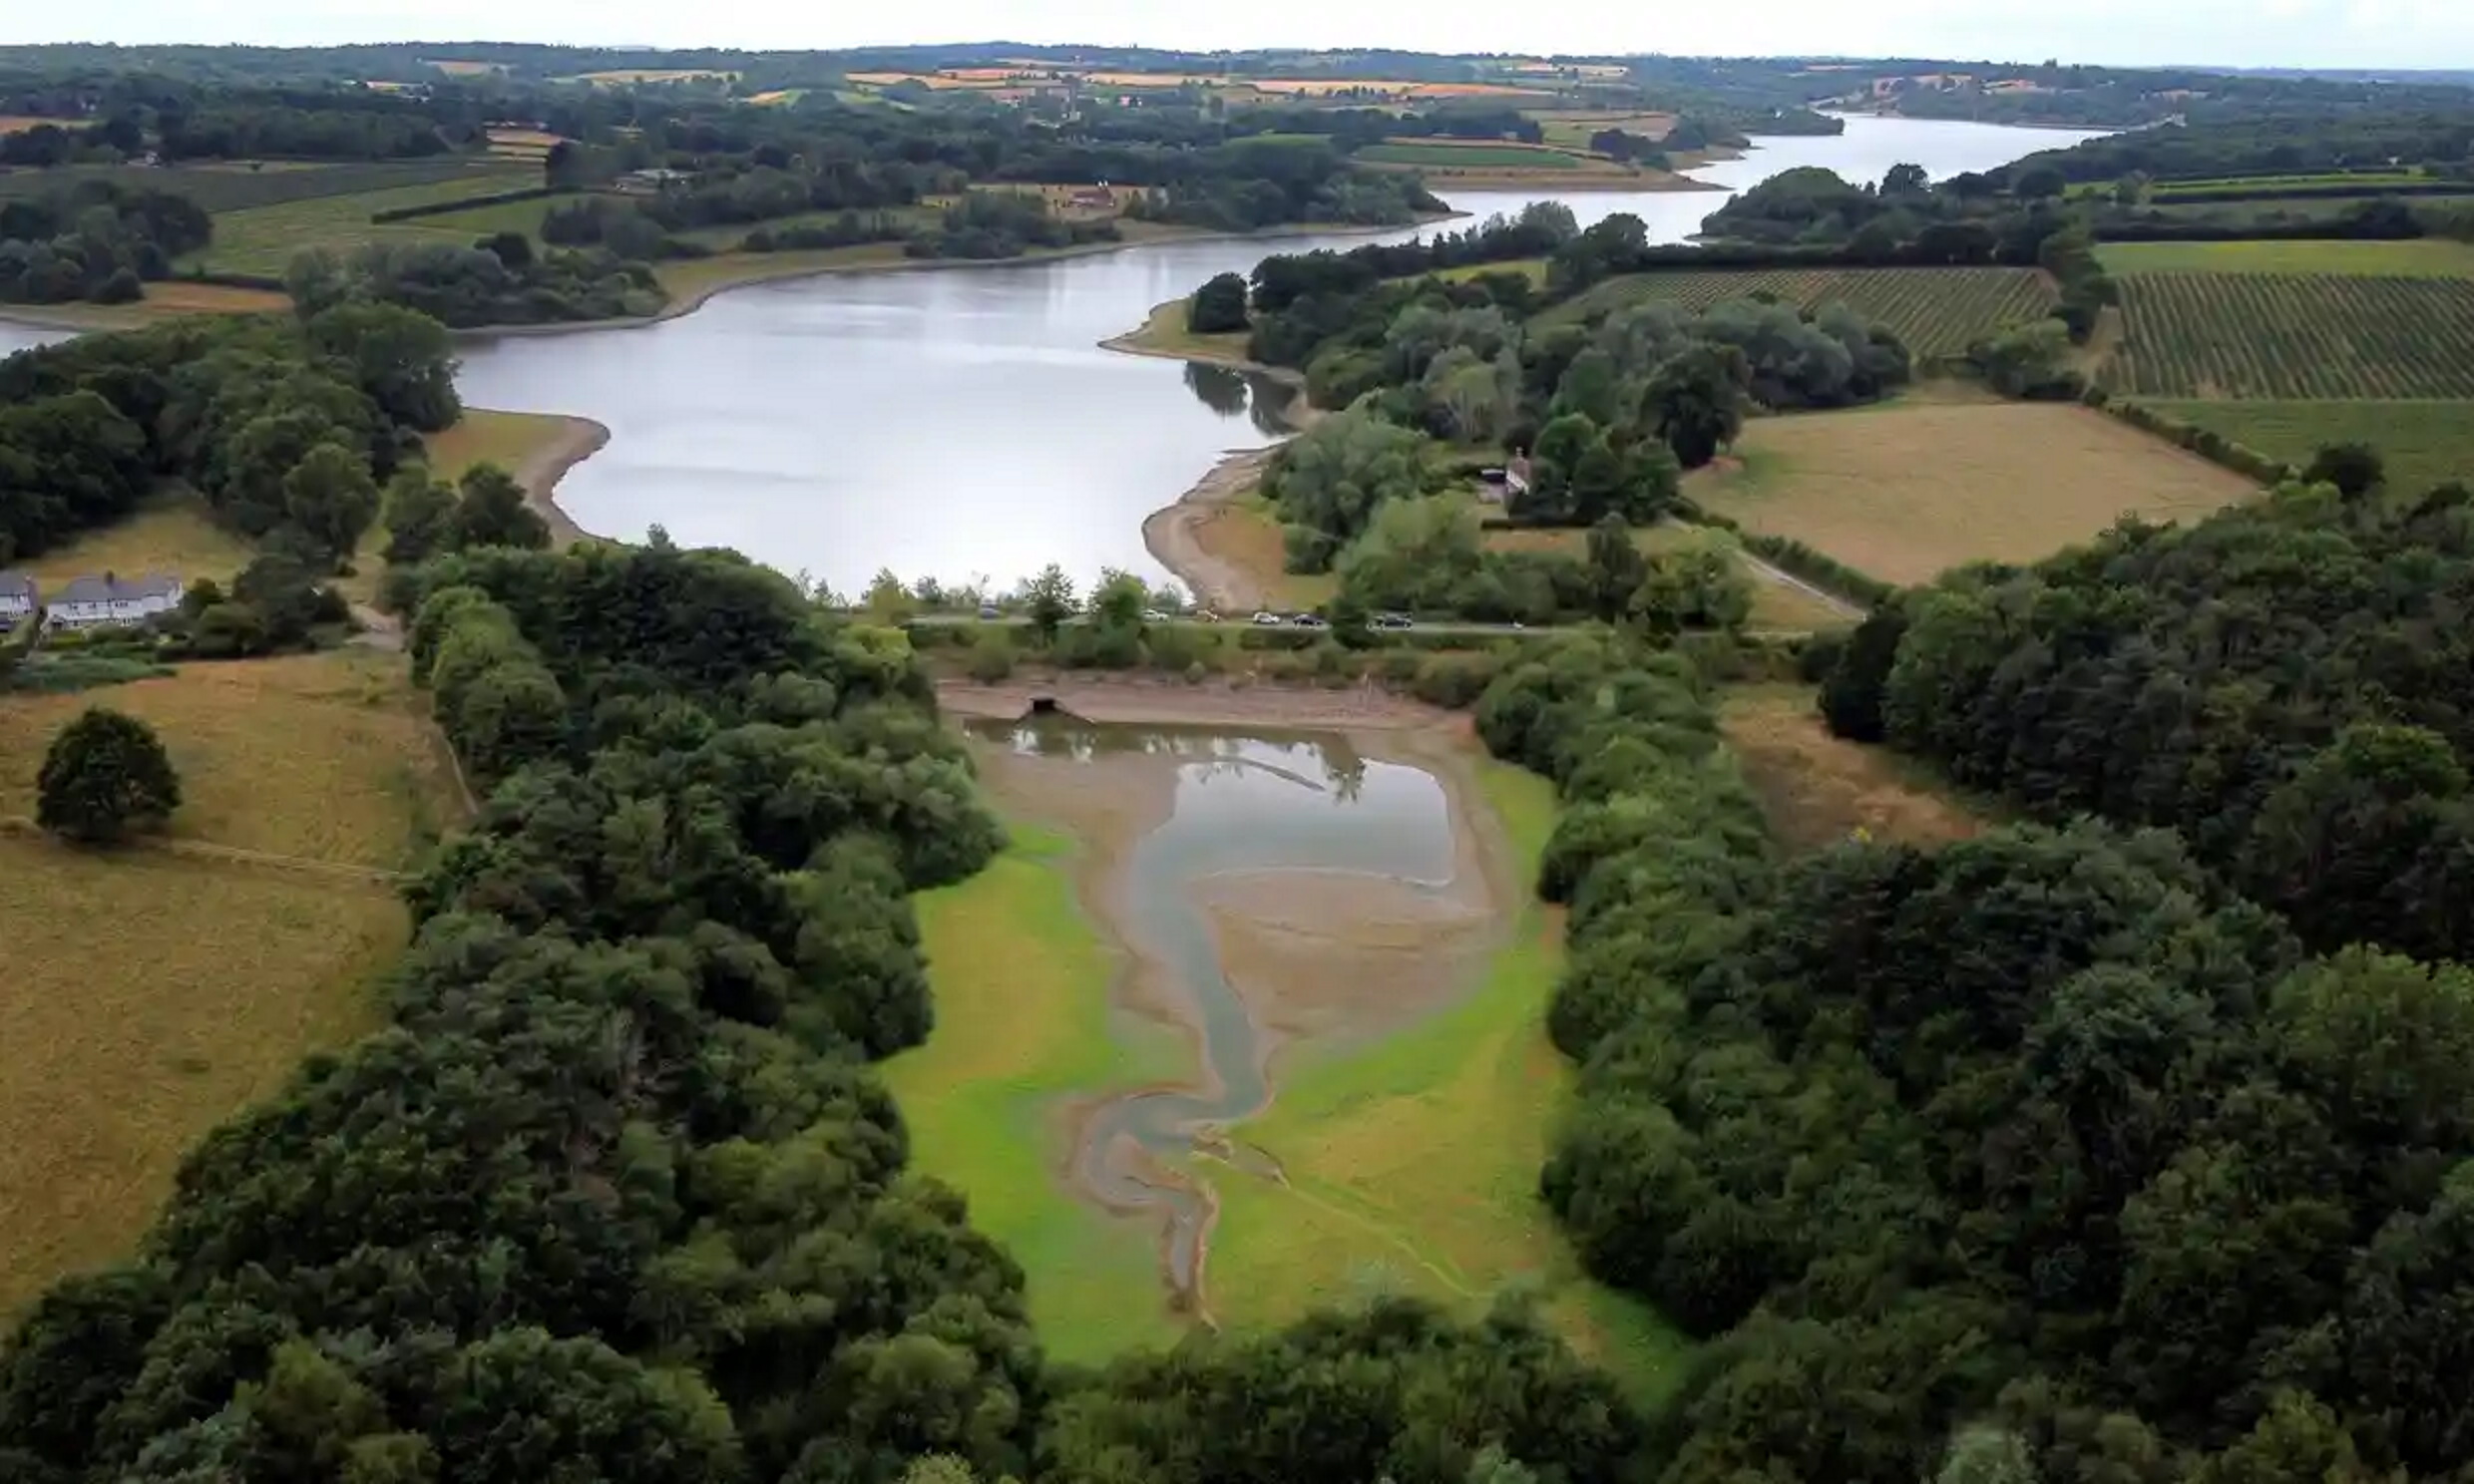 Aerial view of Bewl Reservoir near Lamberhurst in Kent, England. By 31 July 2022, Bewl Reservoir was at 67 percent of its capacity. Photo: Gareth Fuller / PA